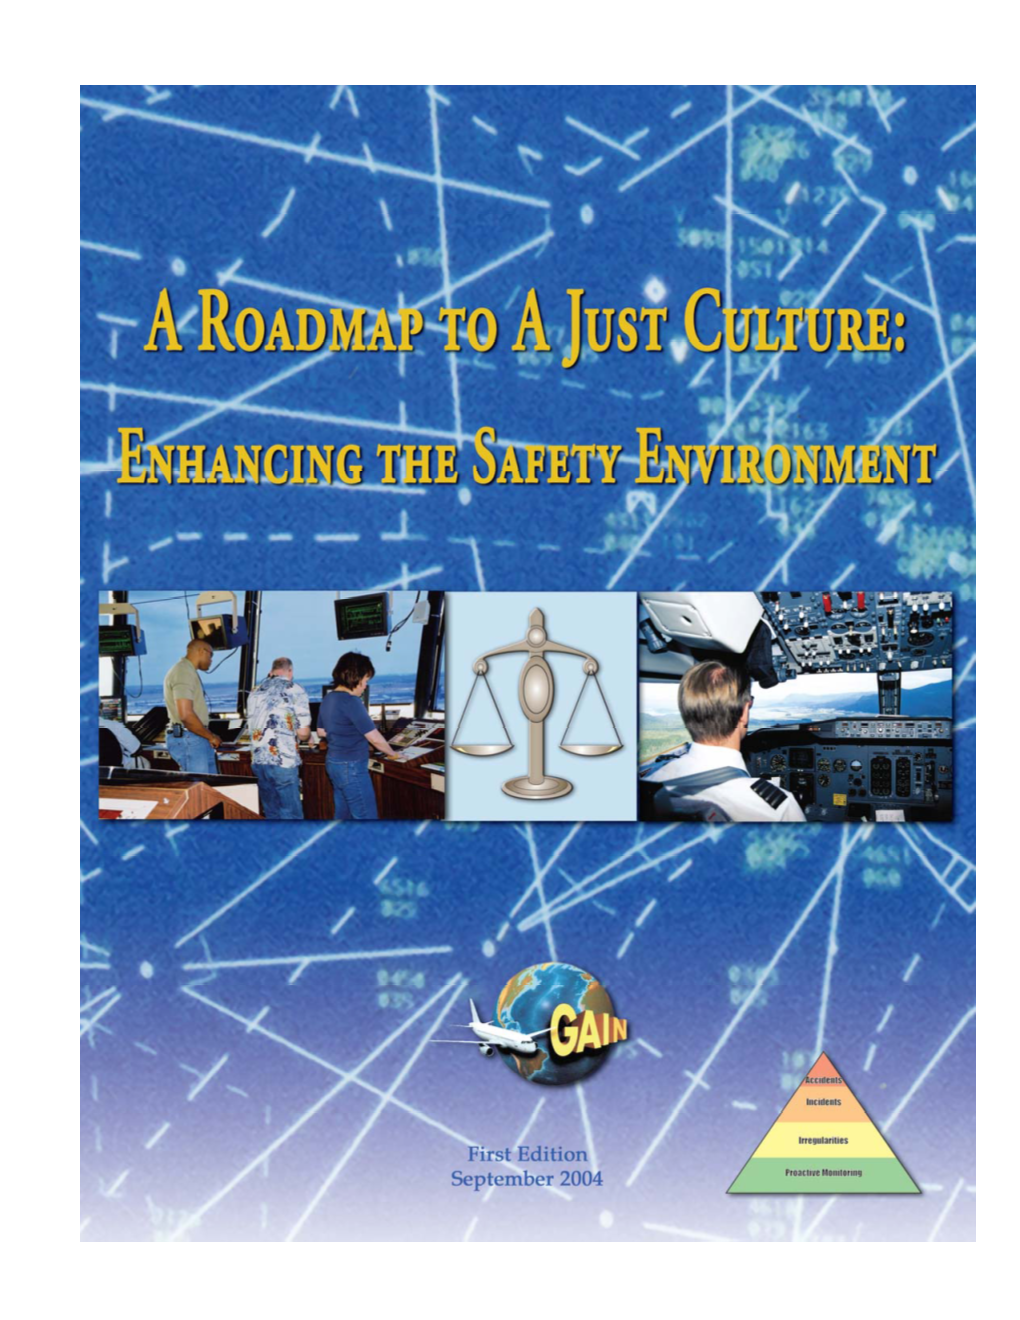 Roadmap to a Just Culture: Enhancing the Safety Environment